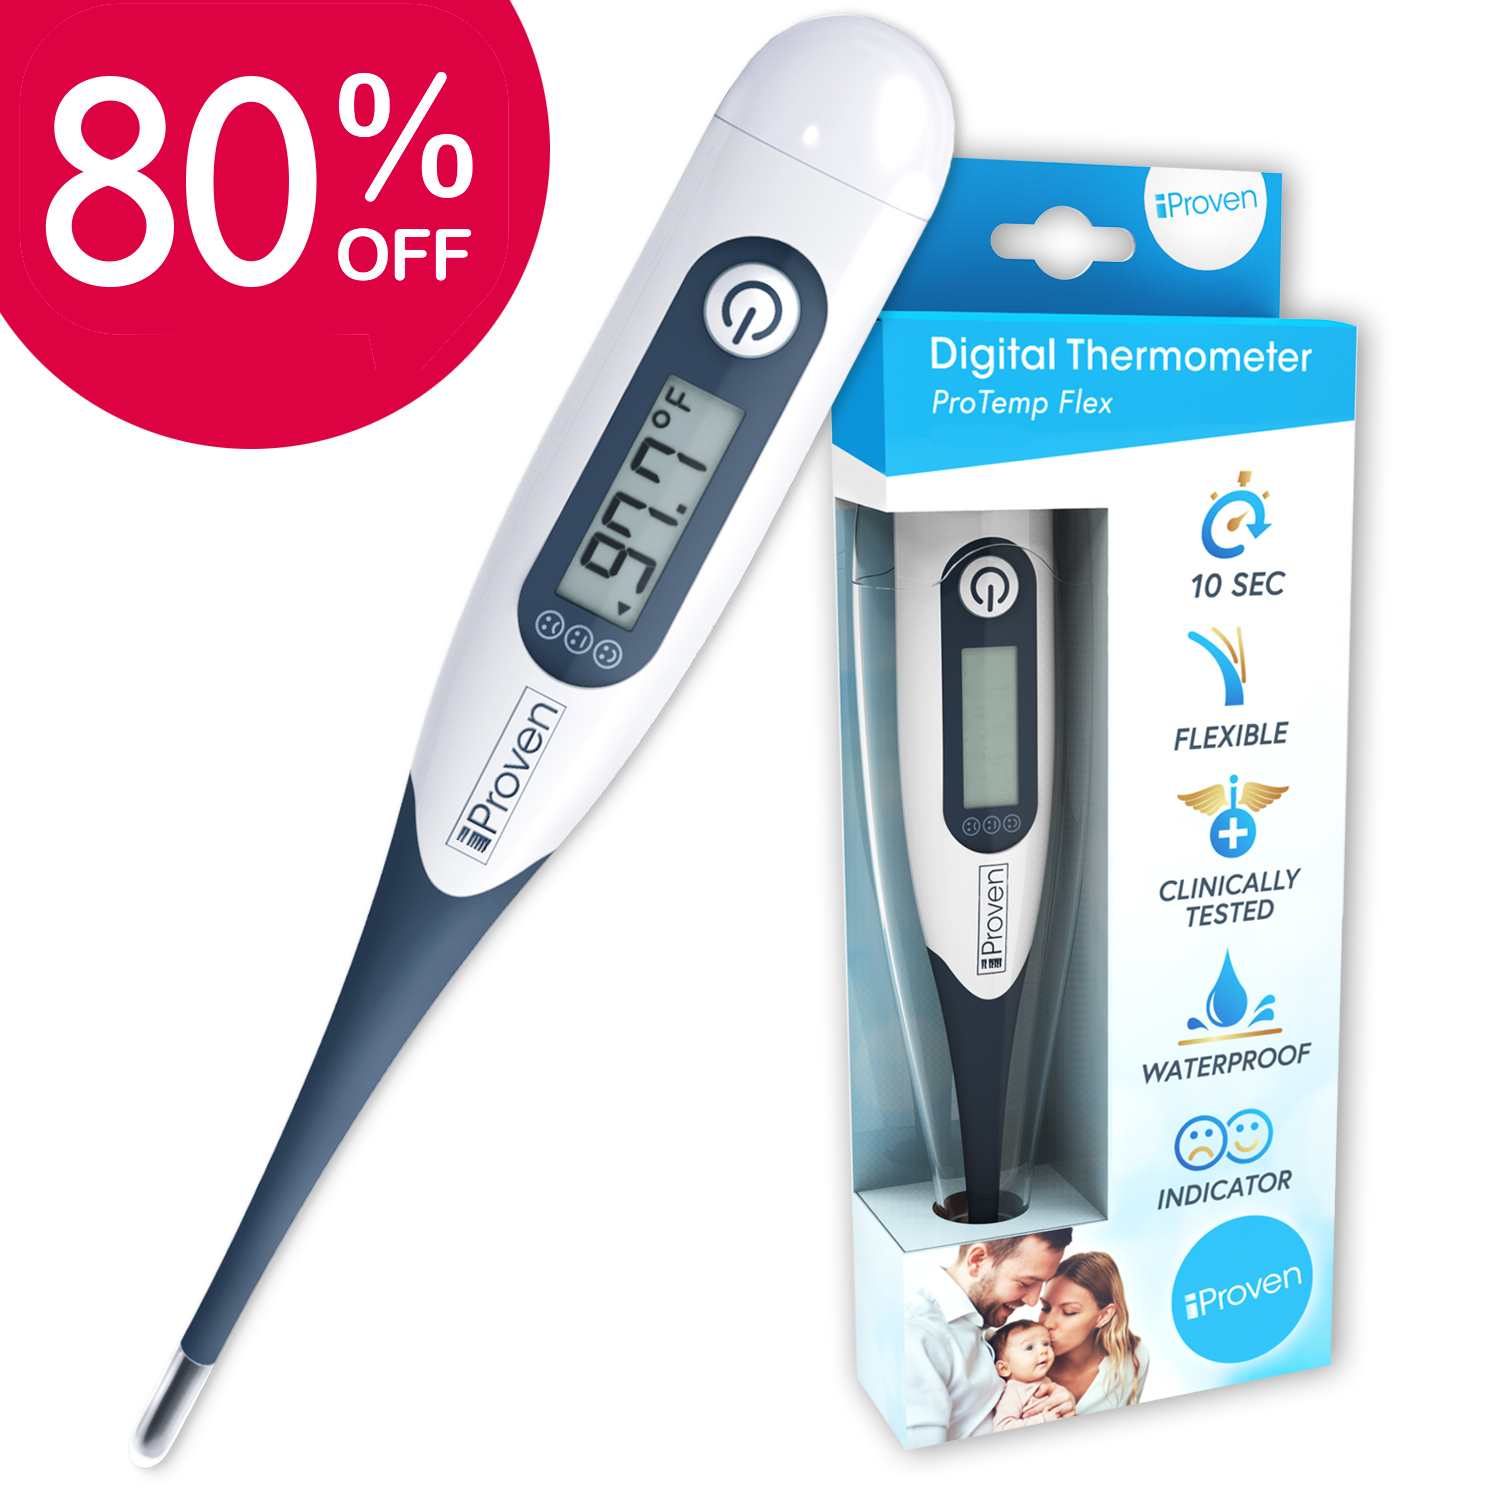 iProven Digital Thermometer $2 / 80% off + free-shipping w/ Prime $1.94